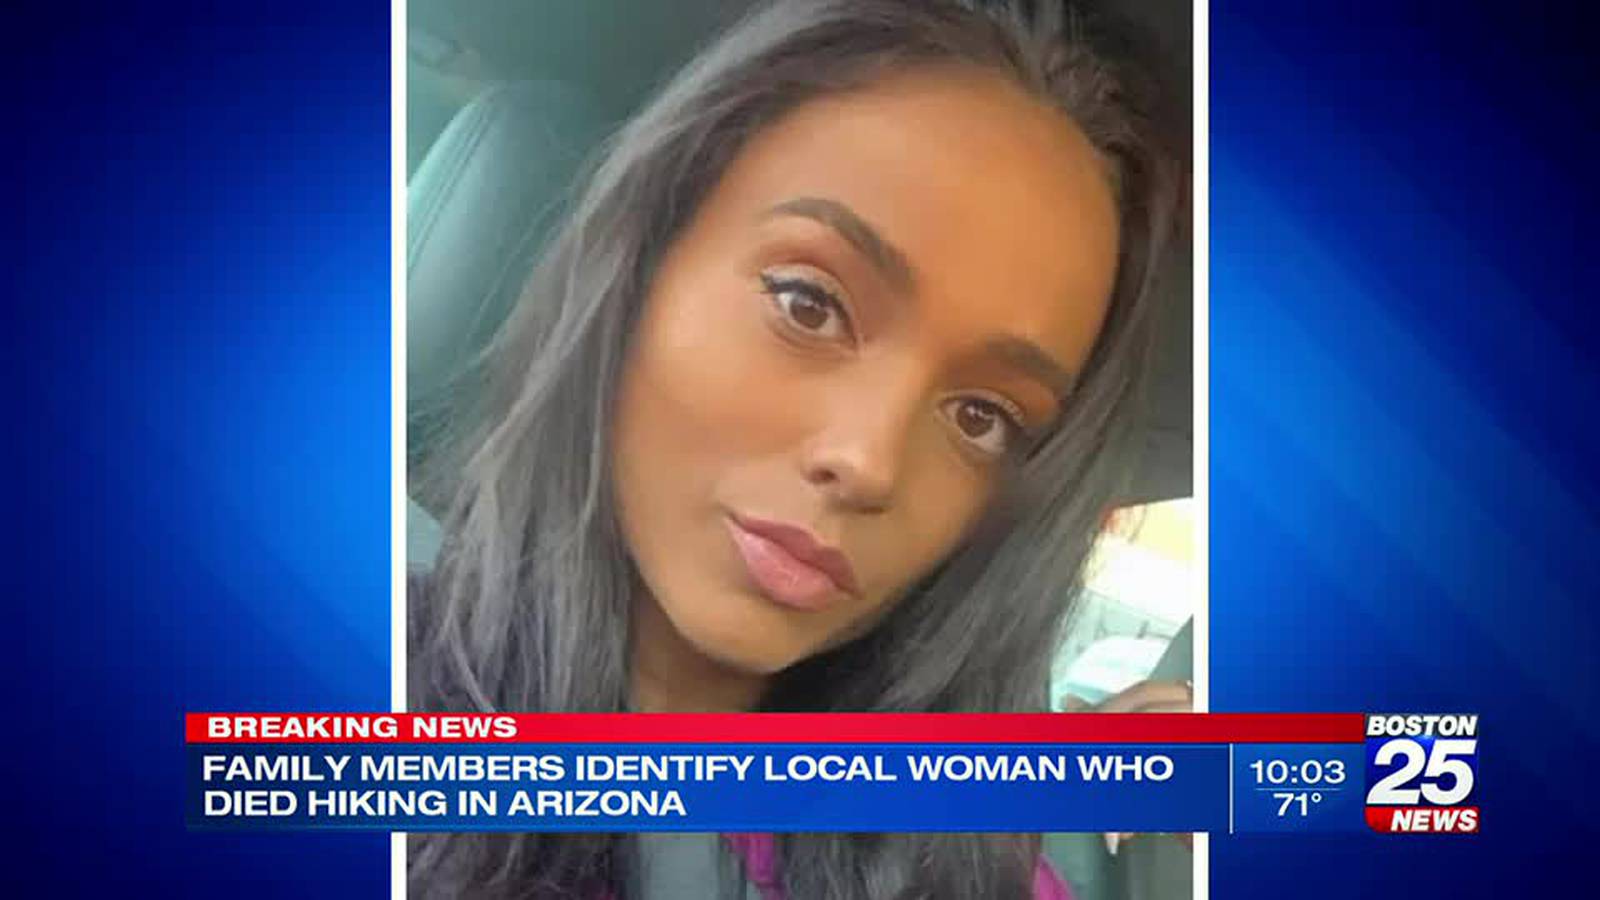 Cause Of Death Released For Local Woman Who Died During Arizona Hike Boston 25 News 4597